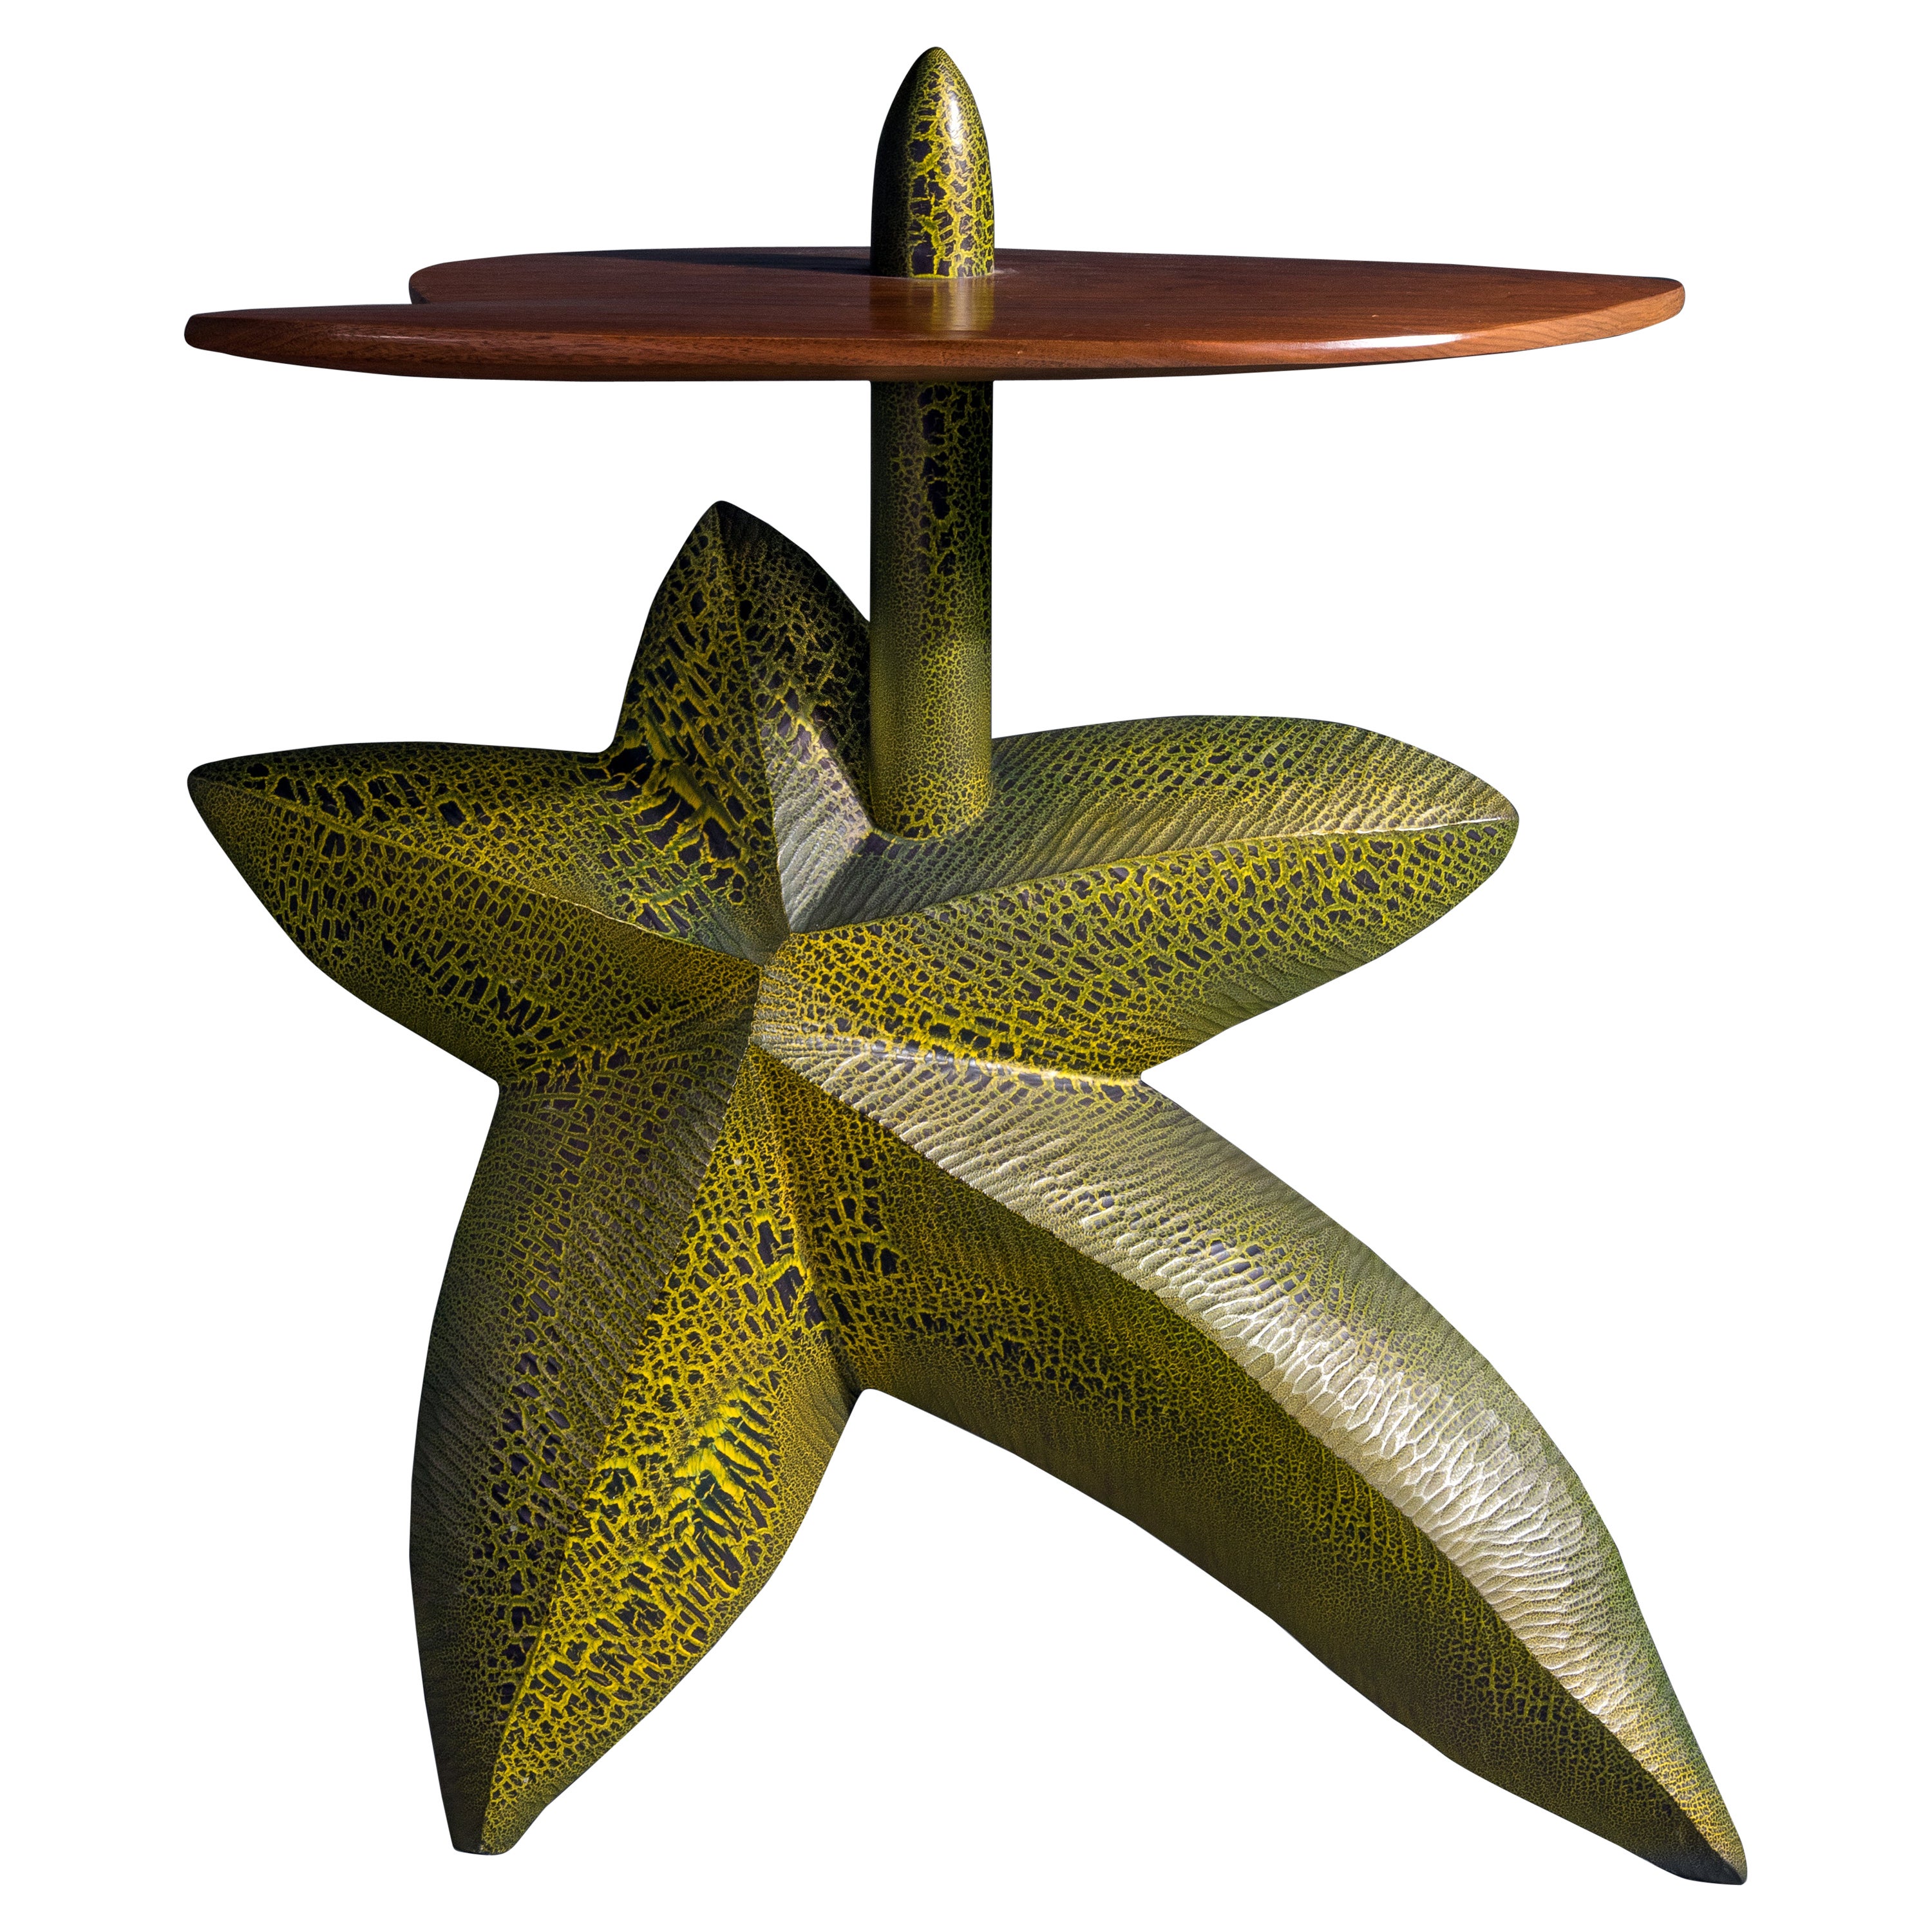 Wendell Castle Starfish Console Table in Polychromed and Stained Woods, 1995 For Sale